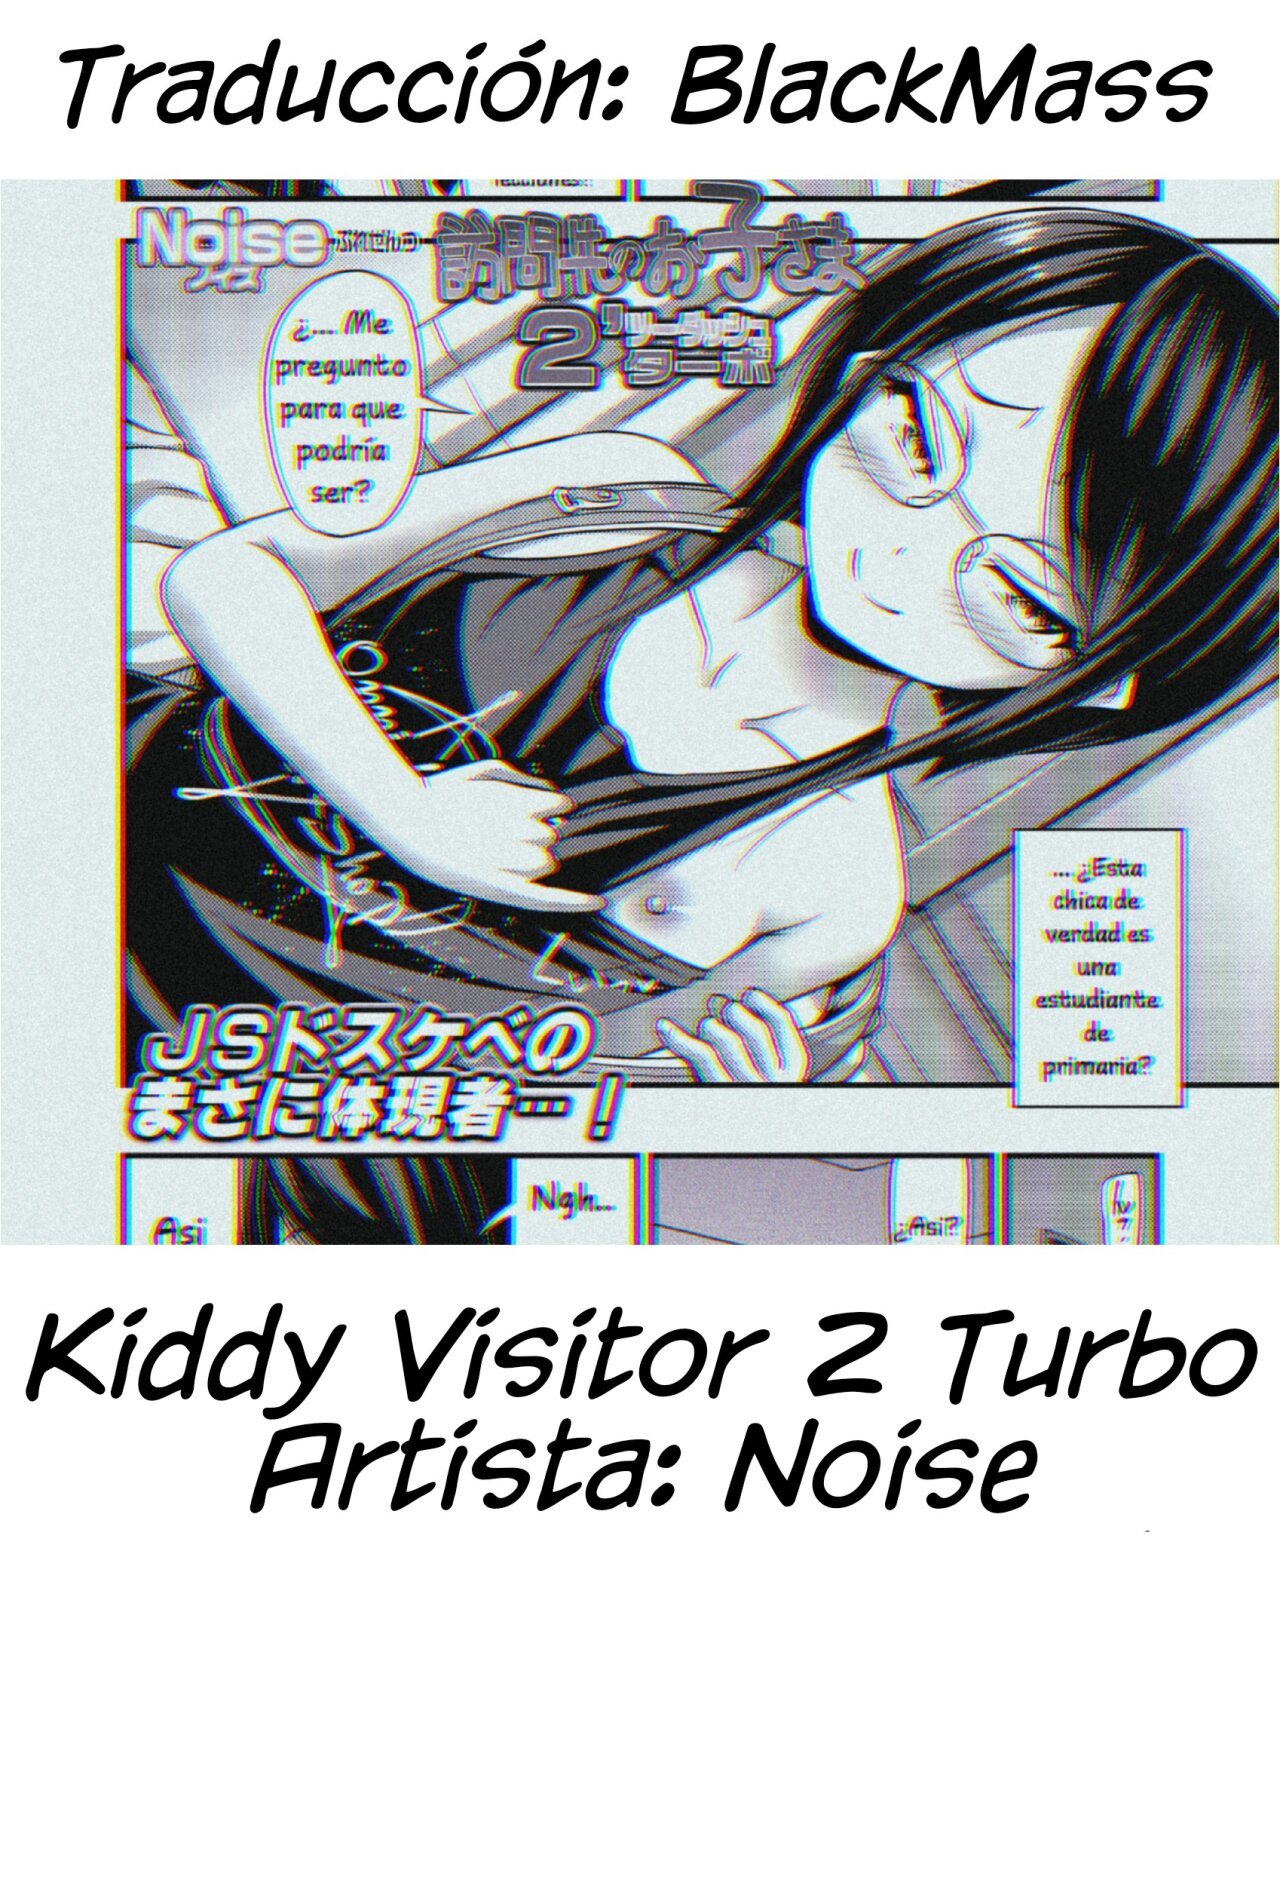 &#91;Noise&#93; Kiddy Visitor 2 Turbo - 10